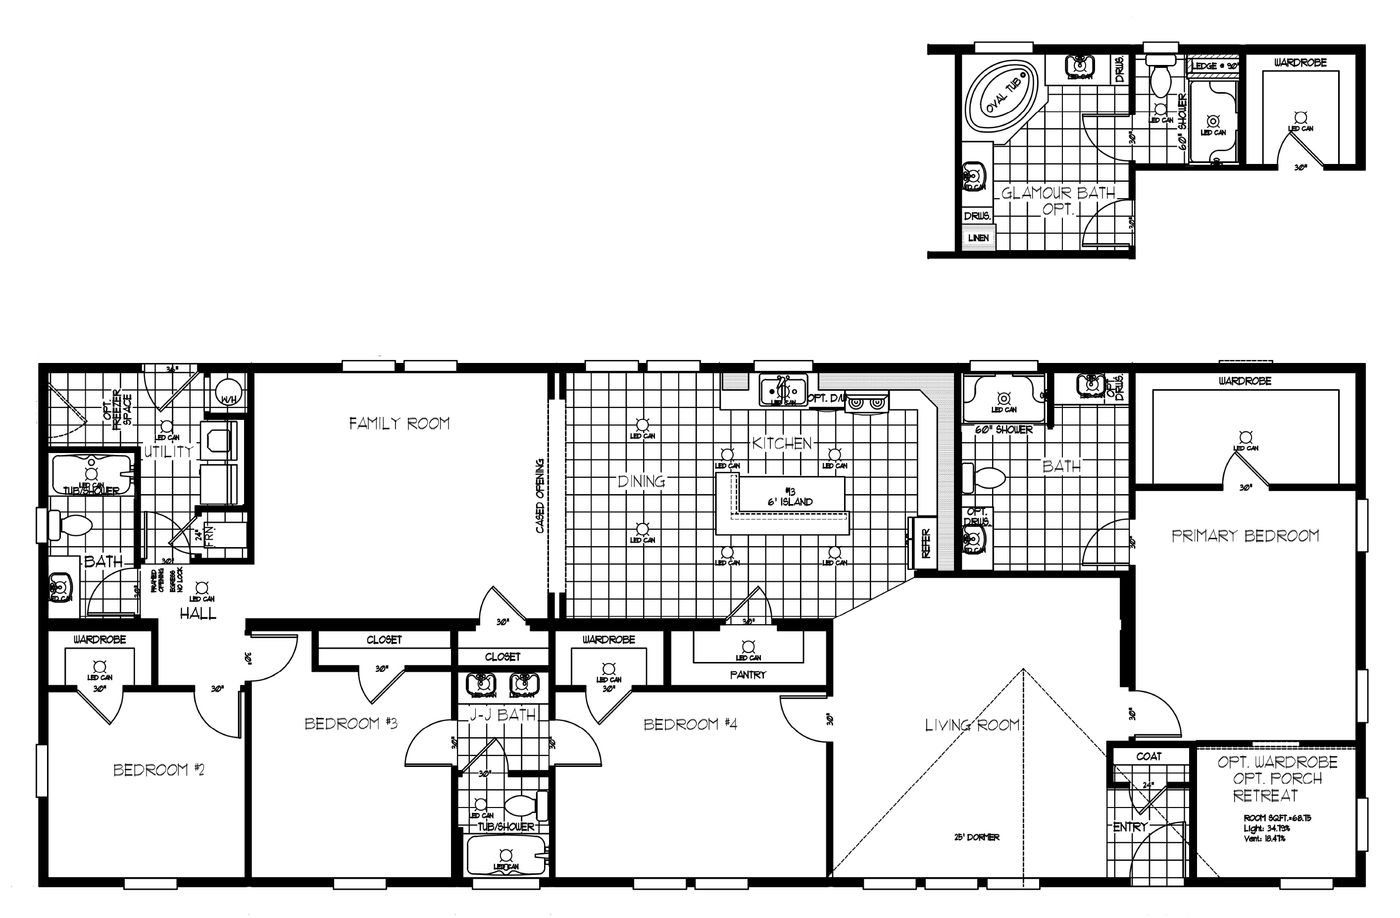 The K3076A Floor Plan. This Manufactured Mobile Home features 4 bedrooms and 2 baths.